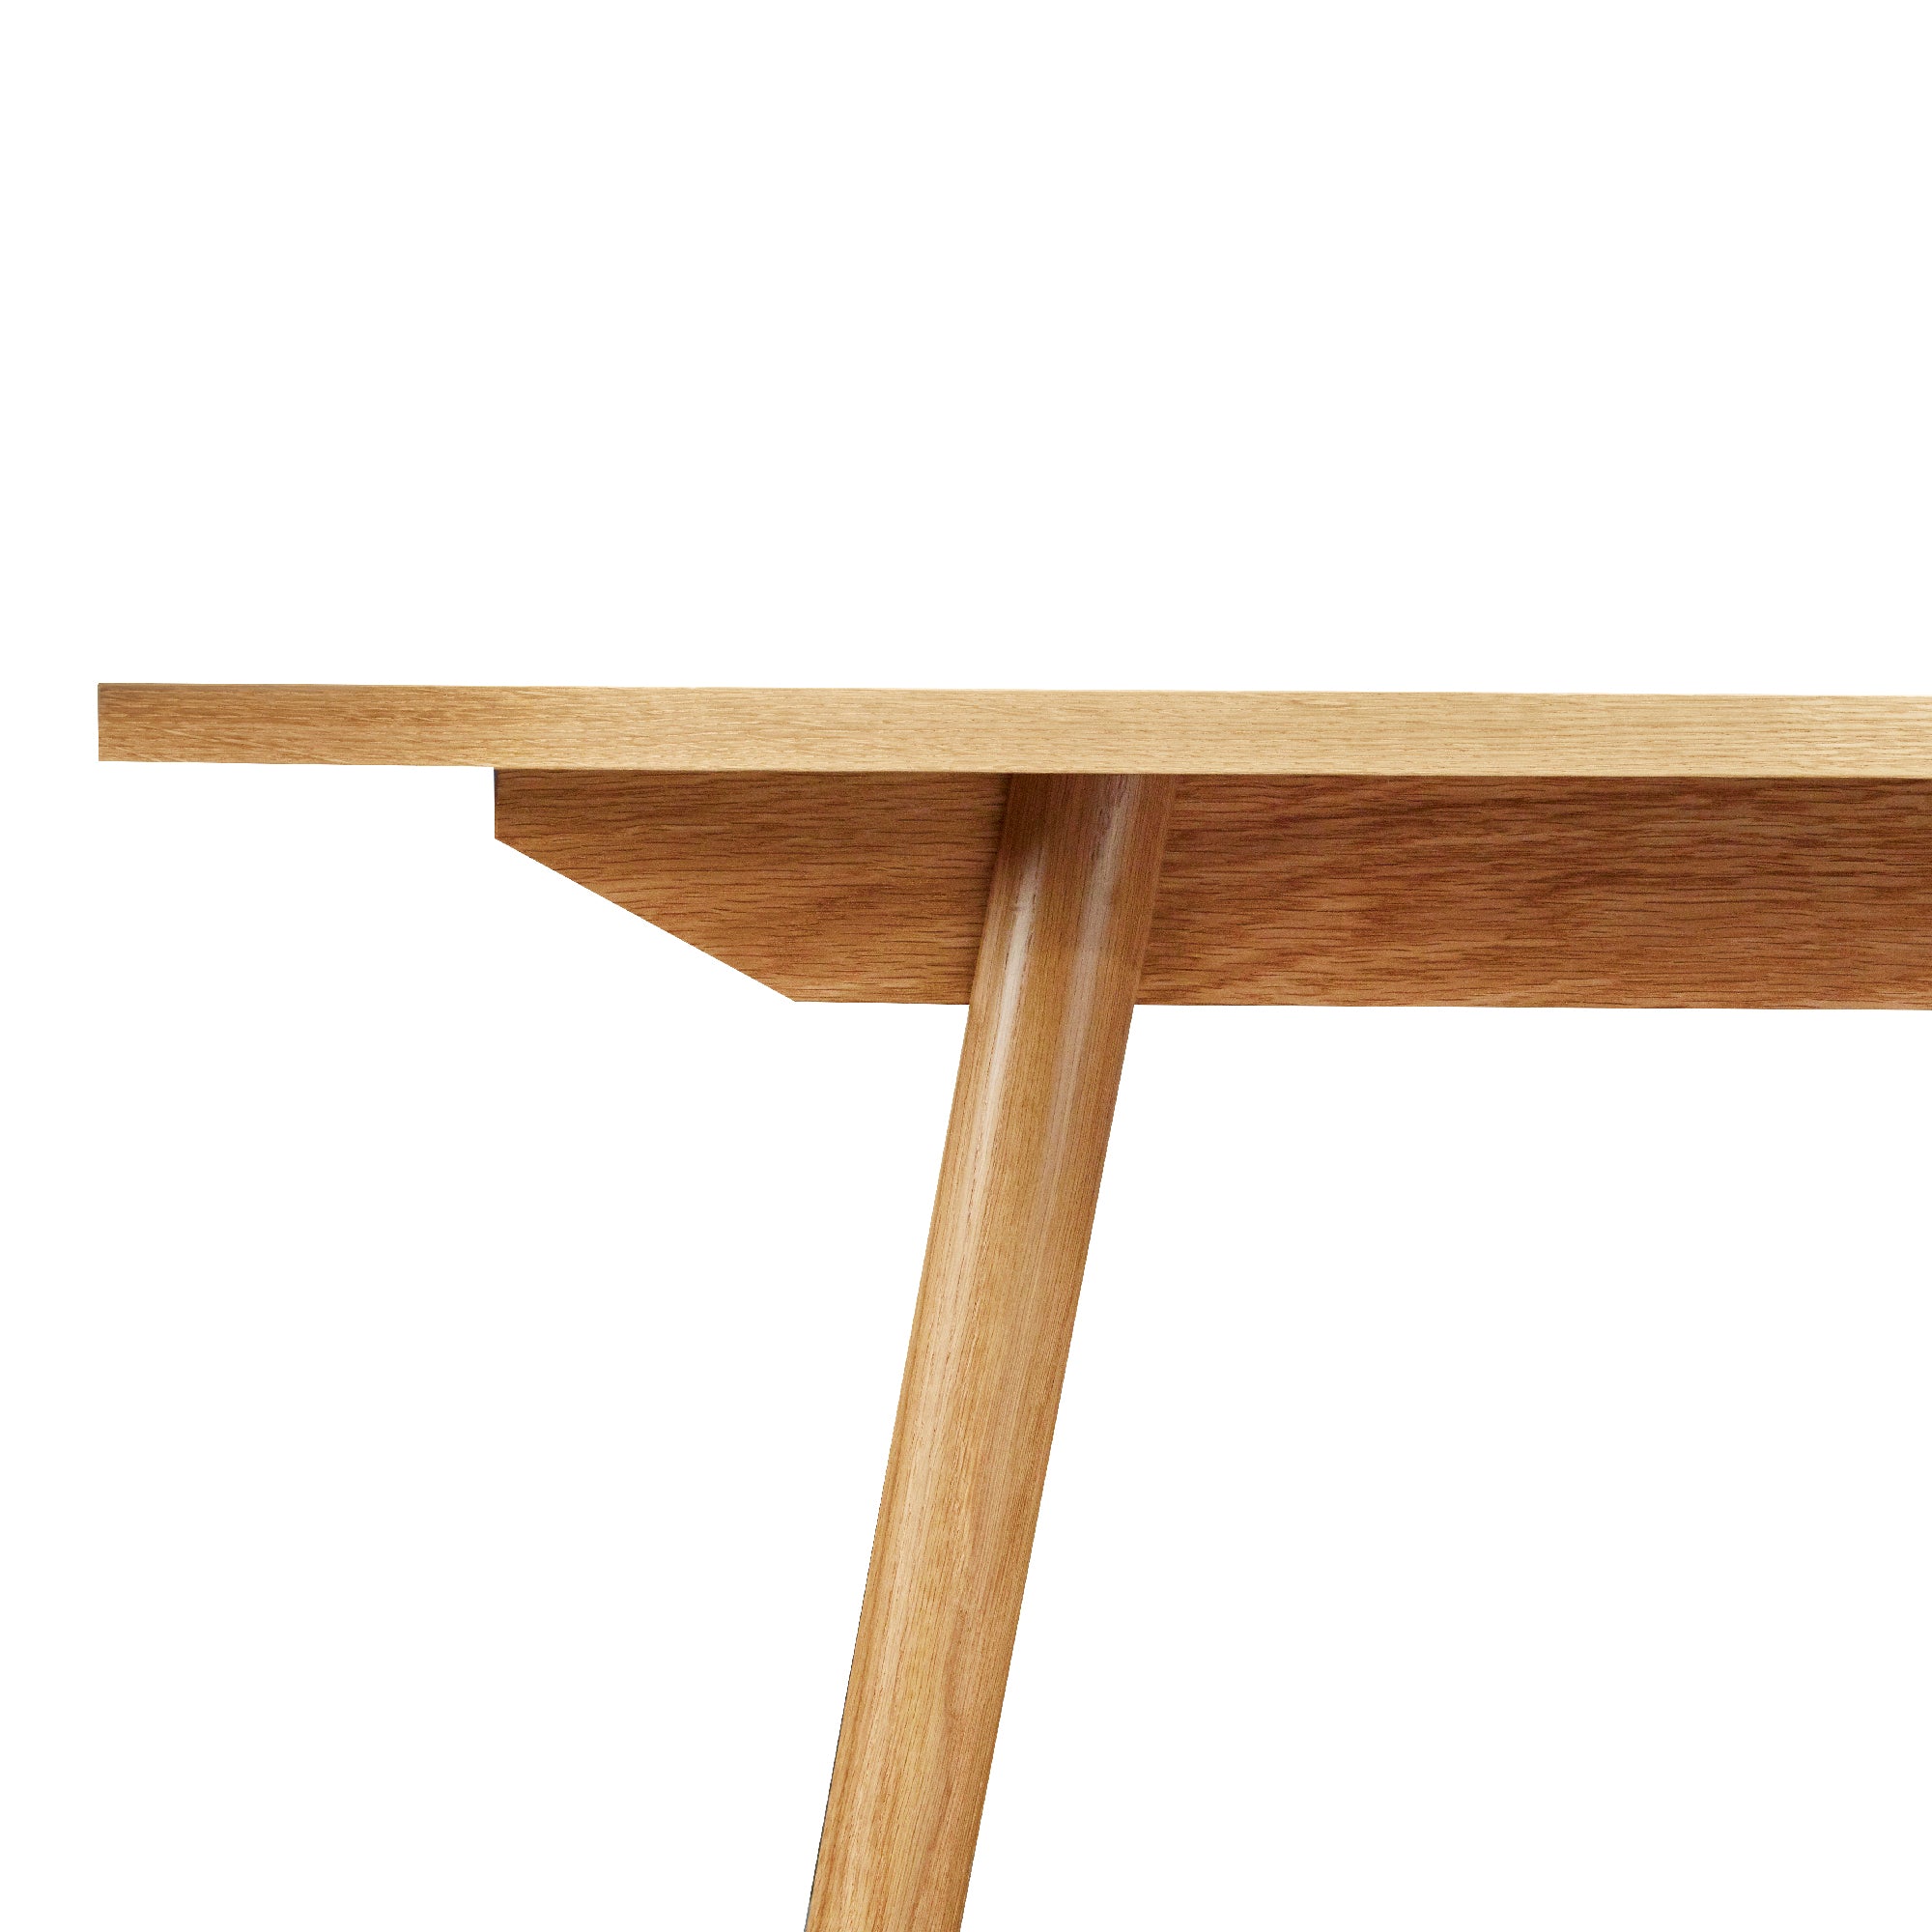 Detail of Mid-century modern Fjord dining table angled legs and apron in solid white oak from Chilton Furniture Co.